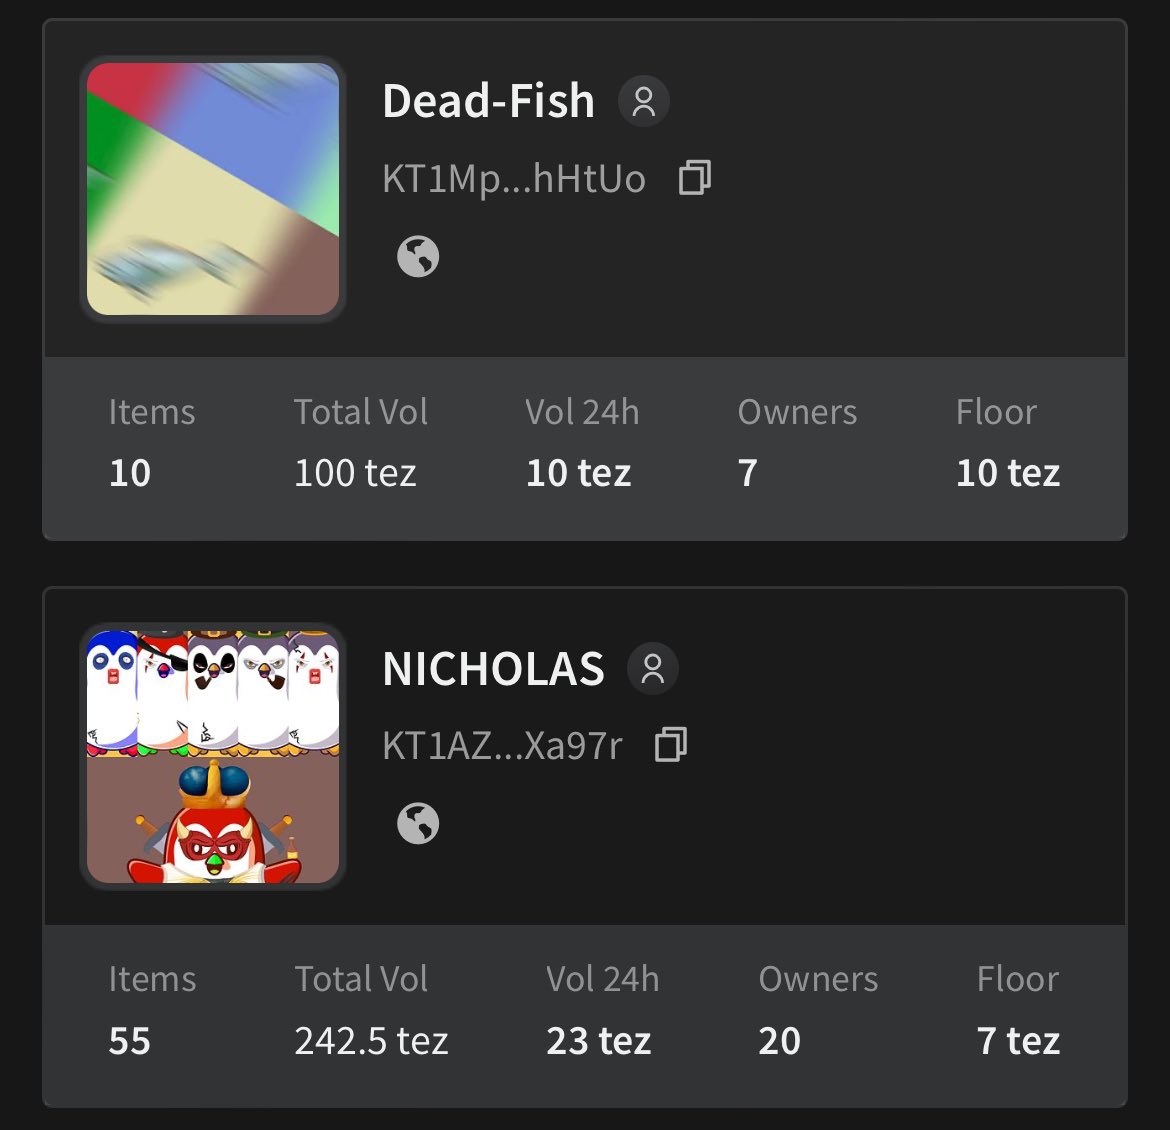 🔴 Breaking News 🔴

▫️ ' Dead-Fish ' Sold Out 🔥

▫️ Rare items of #NICHOLAS Project Sold Out 🔥

▫️2 pieces Sold on secondary 🔥

▪️Wait for another news of project ‼️

#NFT #NFTCommunity #NFTdrops #PFP #tezoscommunity